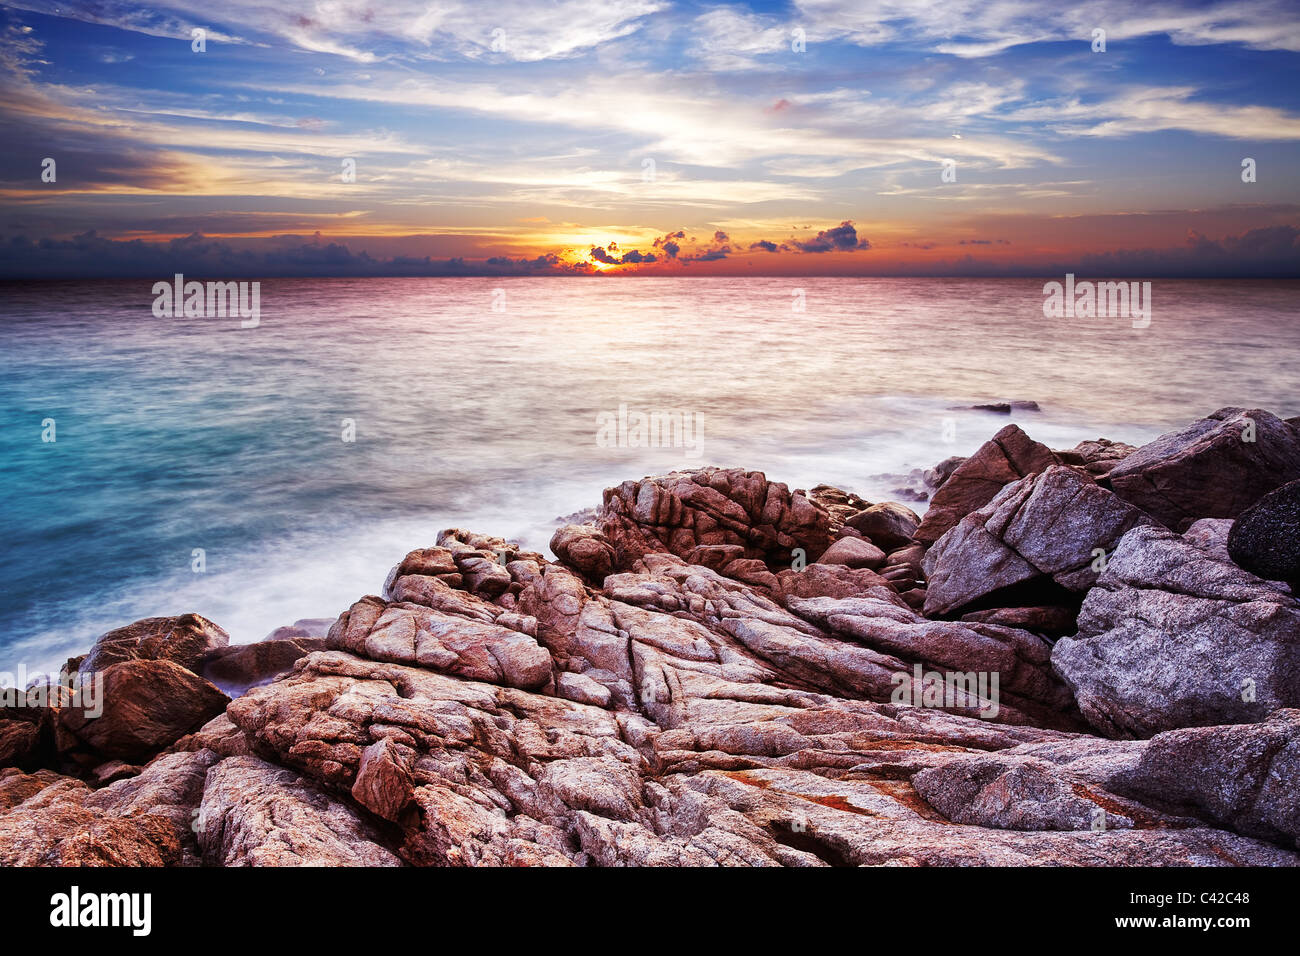 Sunset over the tropical bay. Long exposure shot. Stock Photo